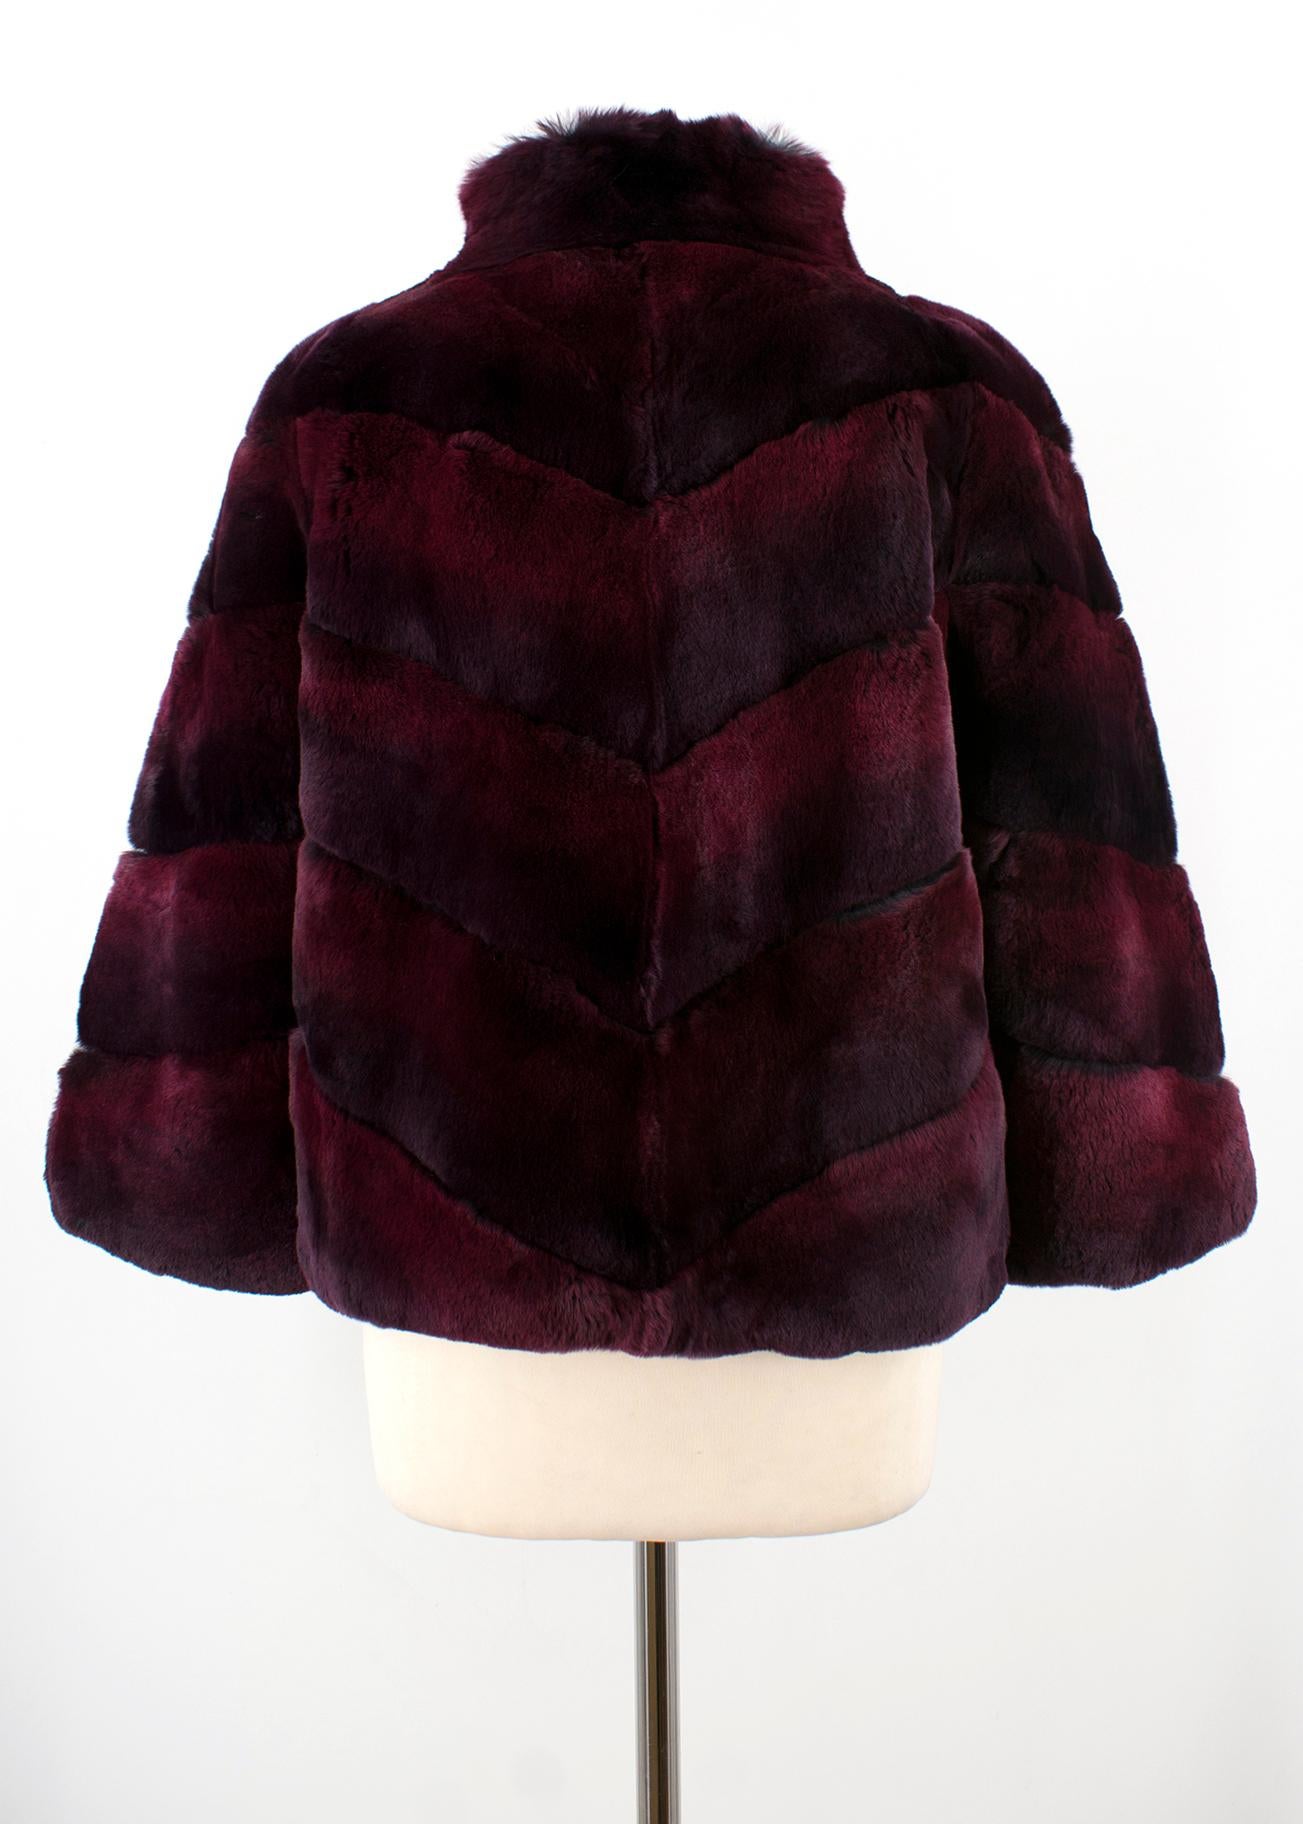 Diane von Furstenberg Purple Rabbit Fur Coat

- 100% dyed rex rabbit fur
- High collar  
- Polyester lining 
- Four hook closures 
- Inside label with security features is a certificate of authenticity 

Sizing:
US 6. Size Small. UK 10.
Approx.